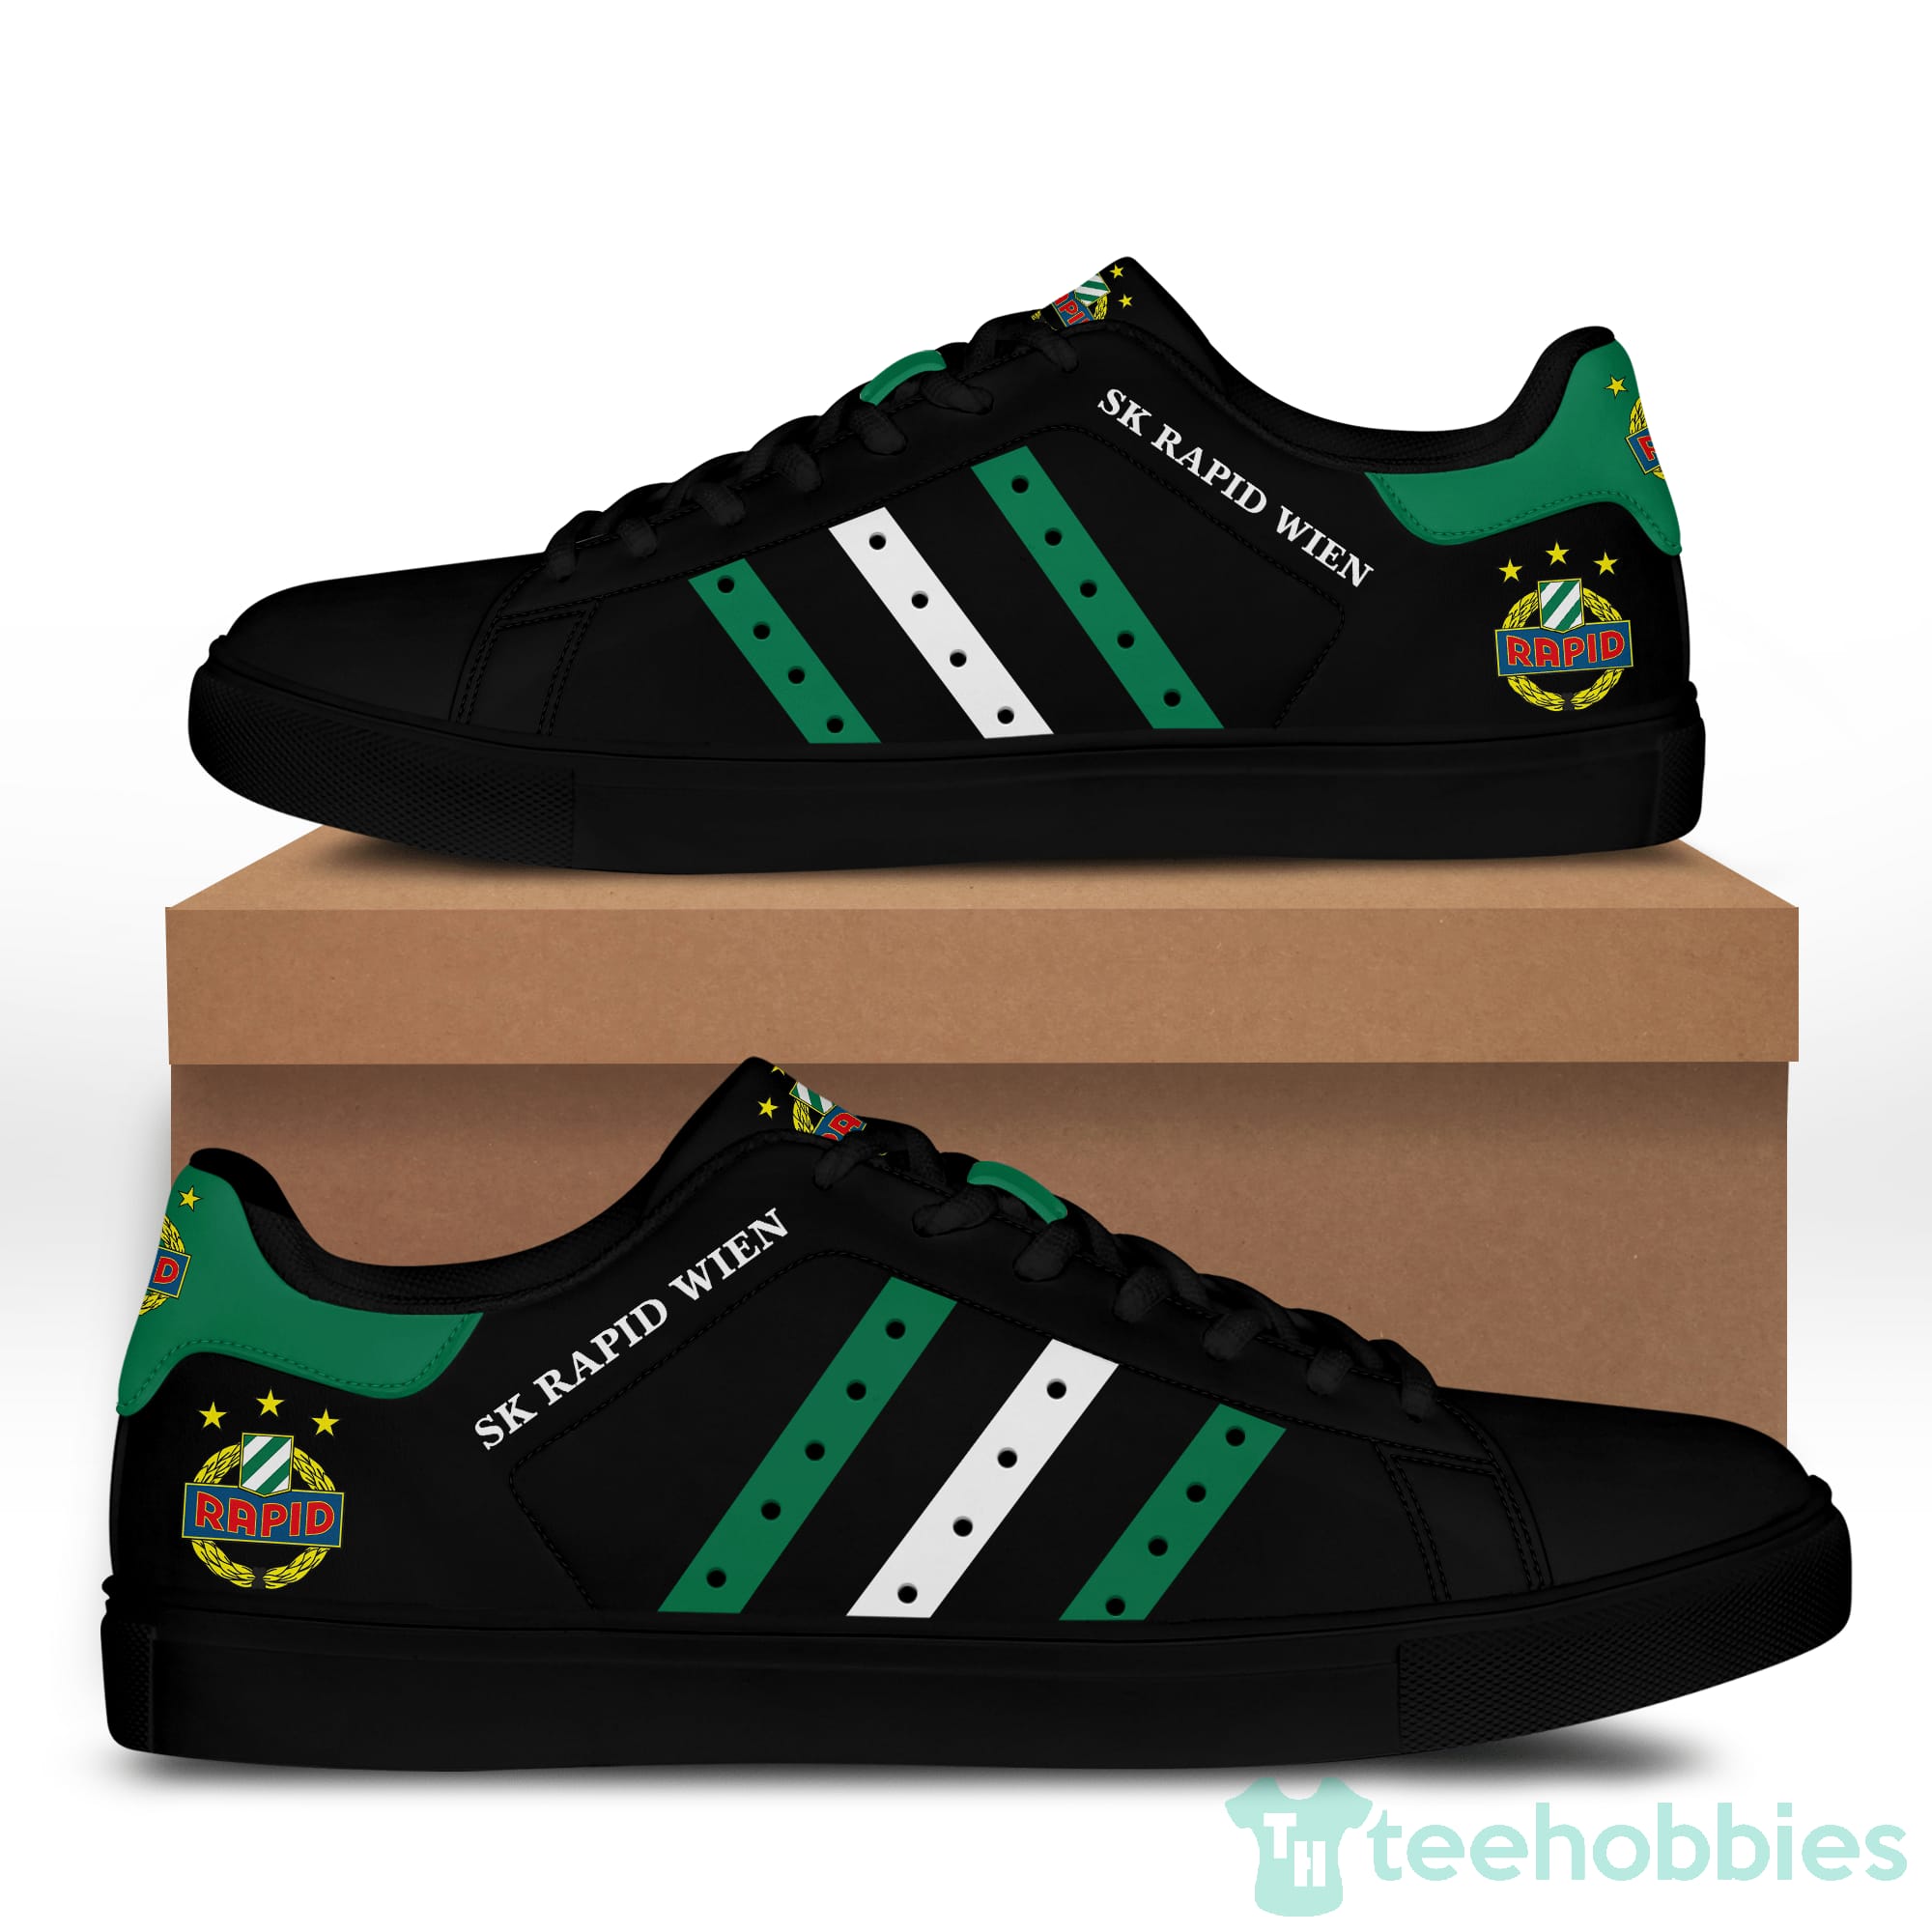 Sk Rapid Wien black And Green Low Top Skate Shoes Product photo 1